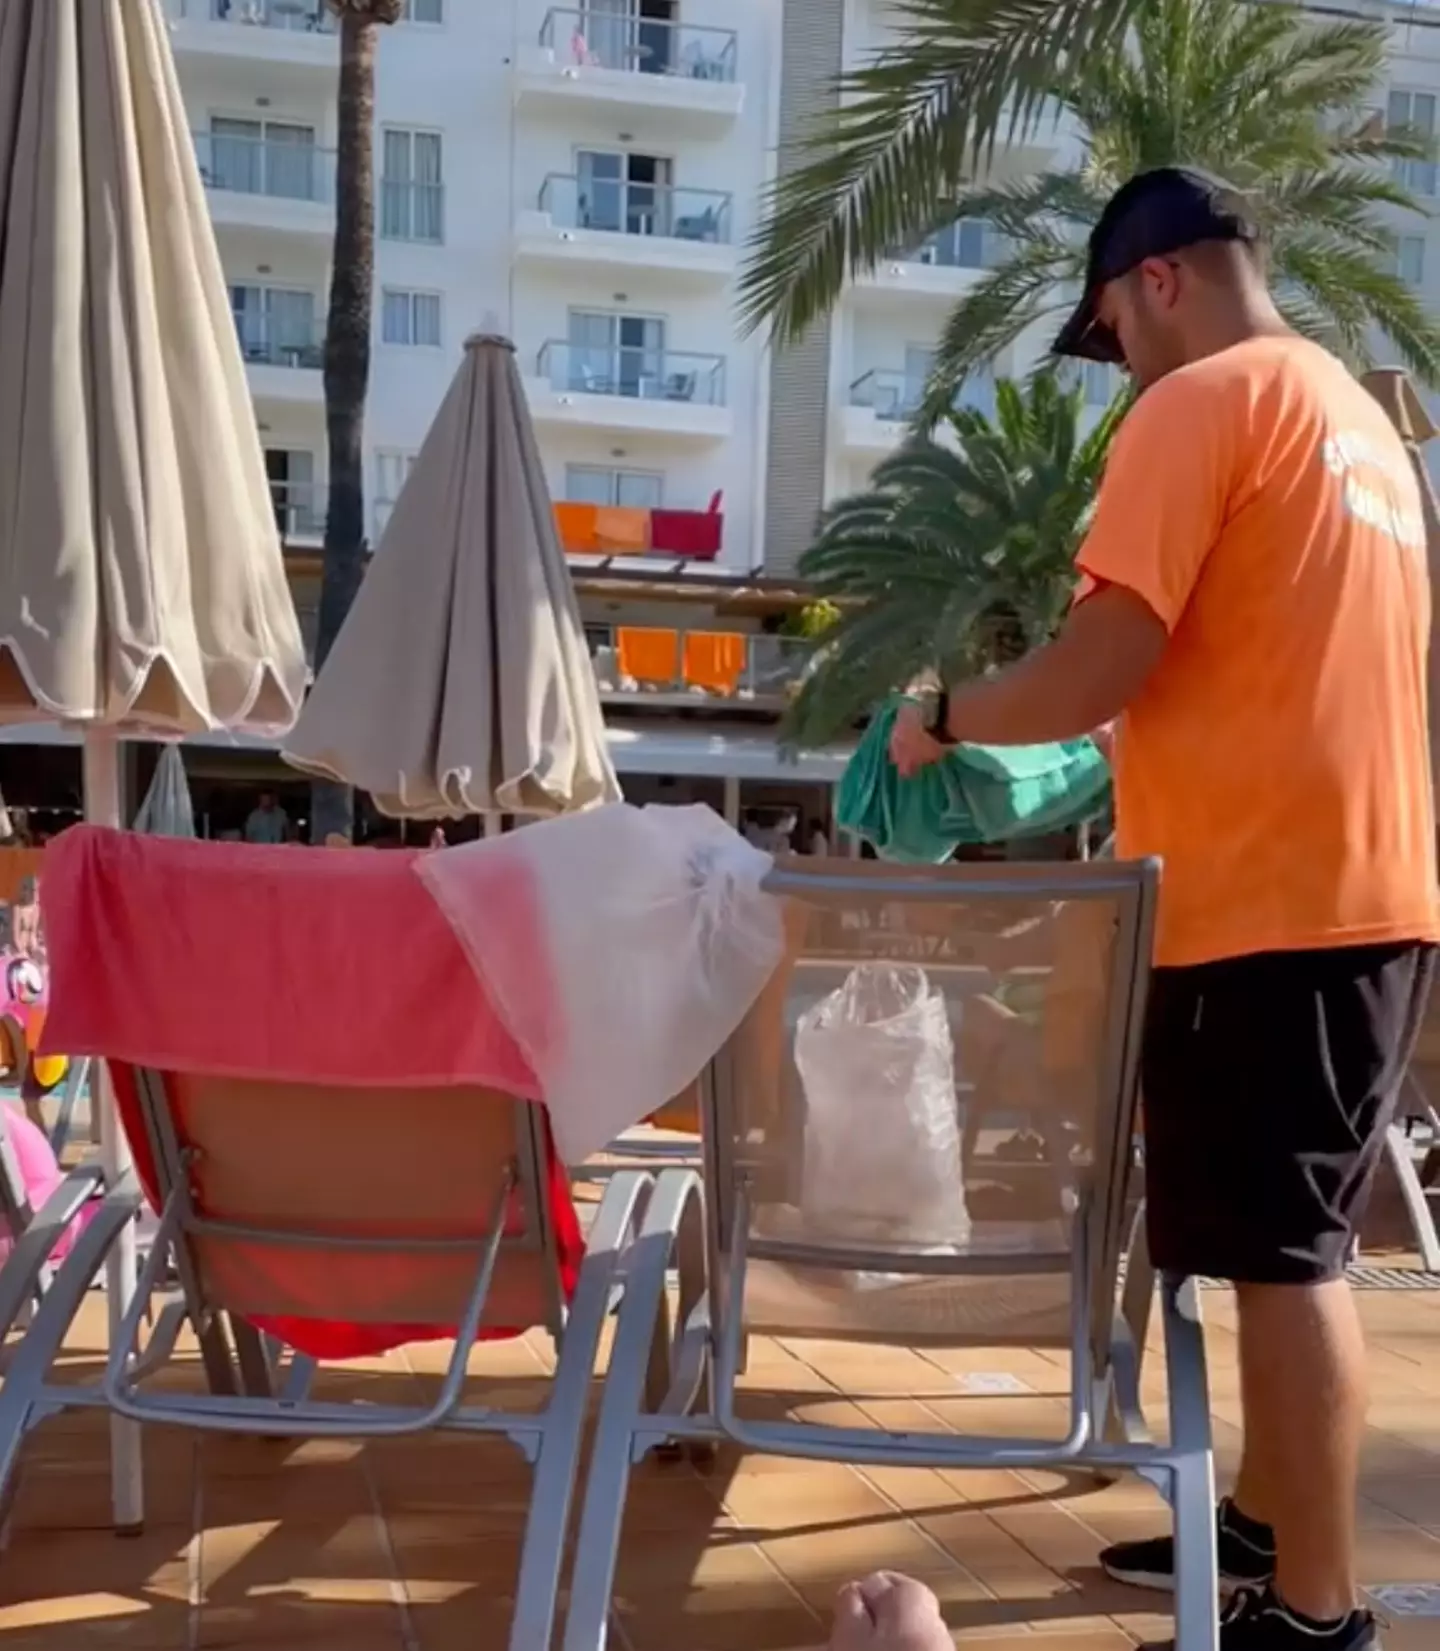 The hotel employee removed the towels from the unoccupied sunbeds.